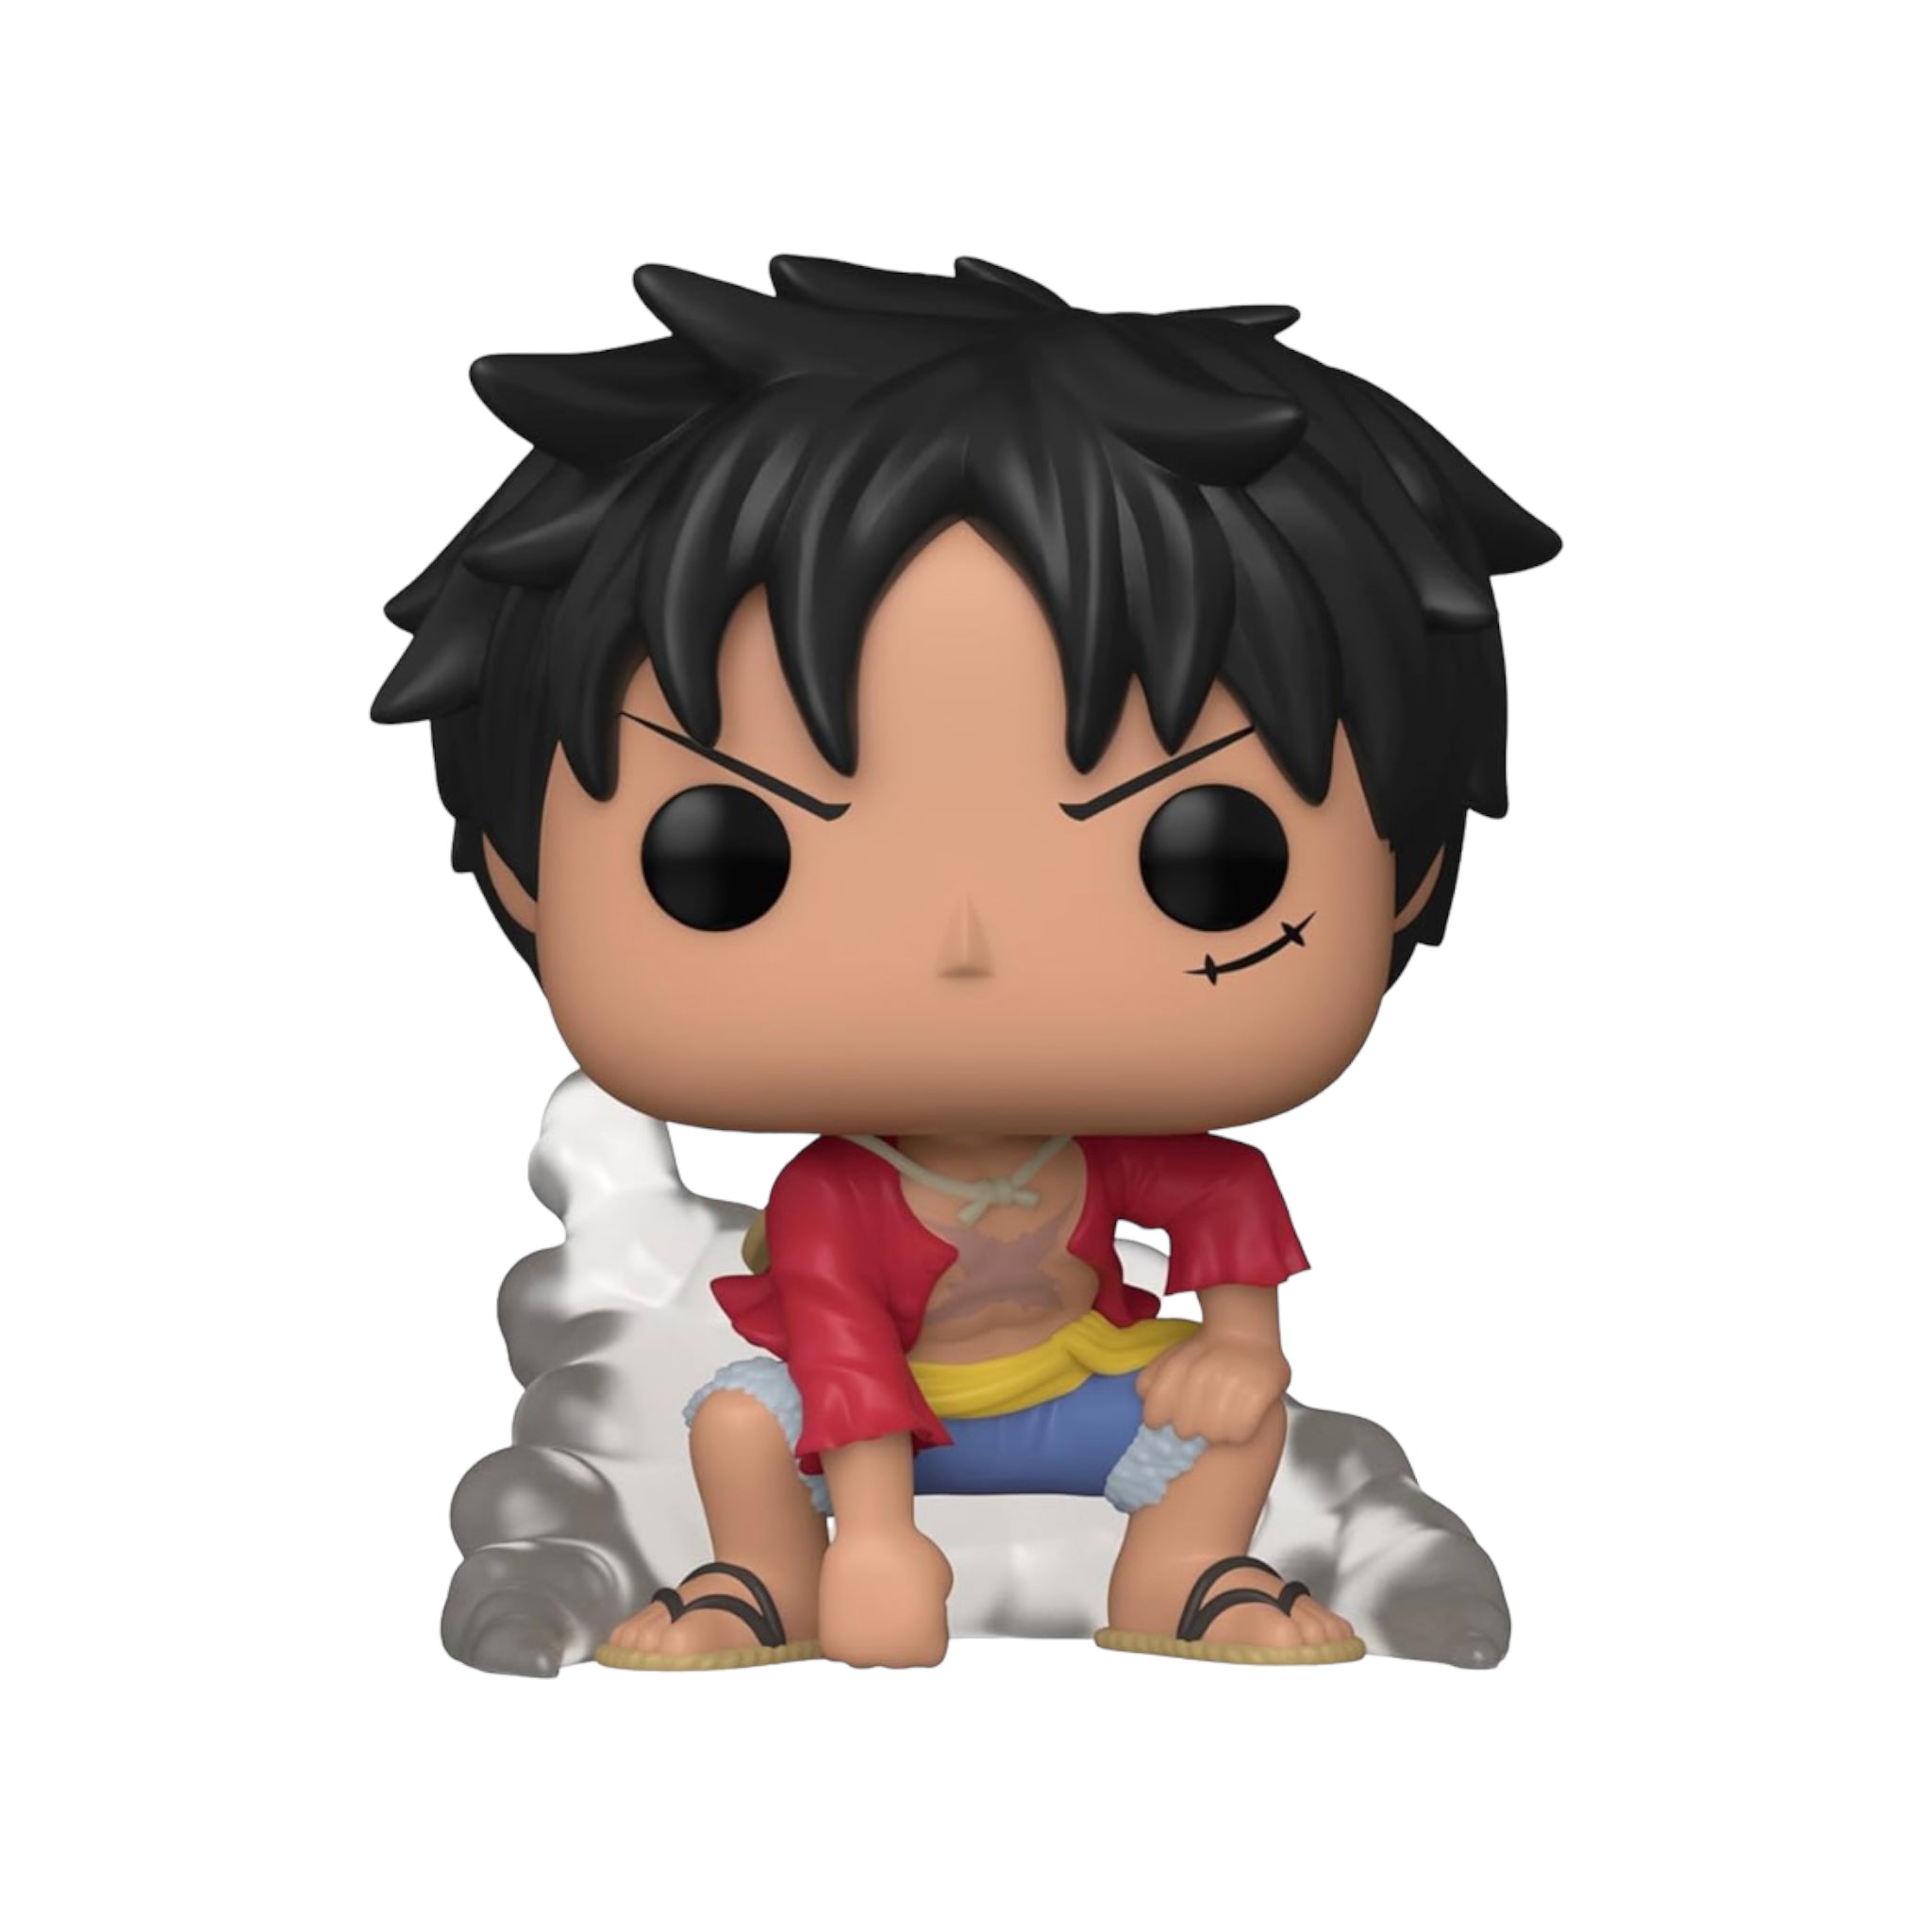 Luffy Gear Two #1269 Funko Pop! - One Piece - Special Edition